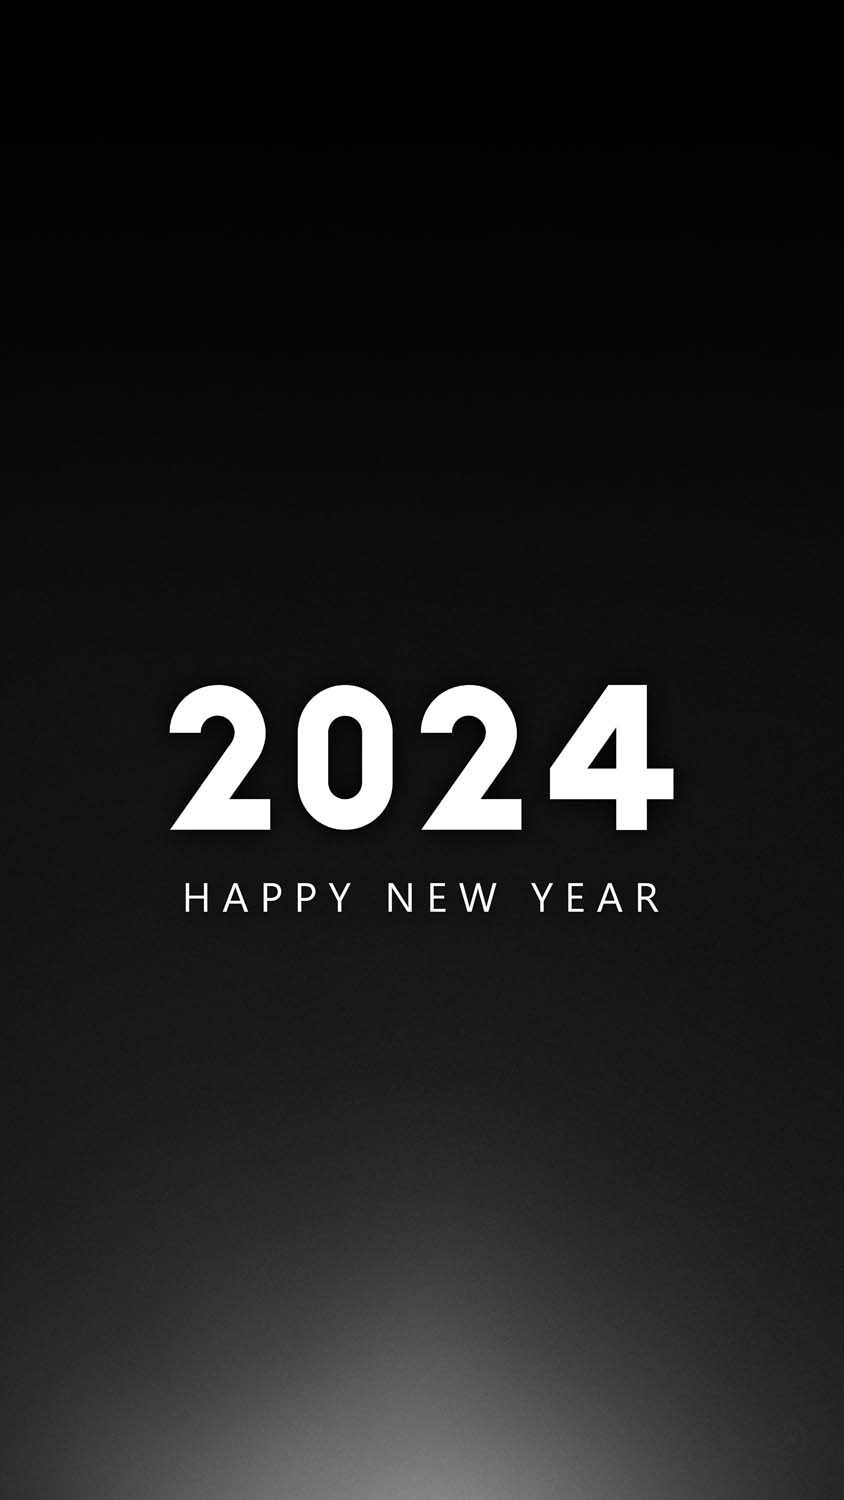 iPhone New Year 2024 Wallpapers Wallpaper Cave